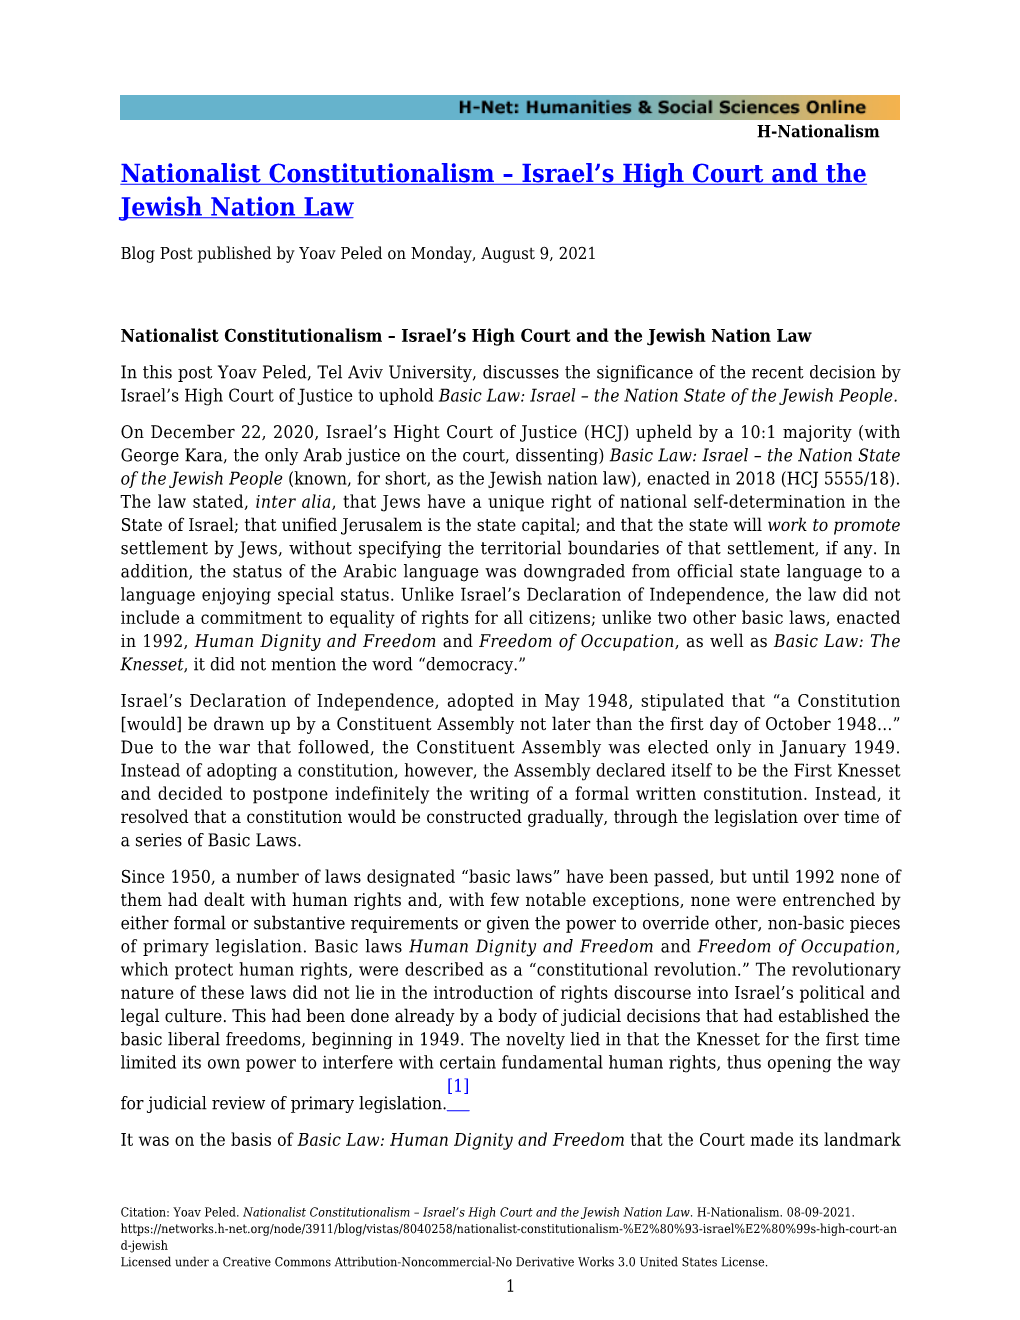 Israel's High Court and the Jewish Nation